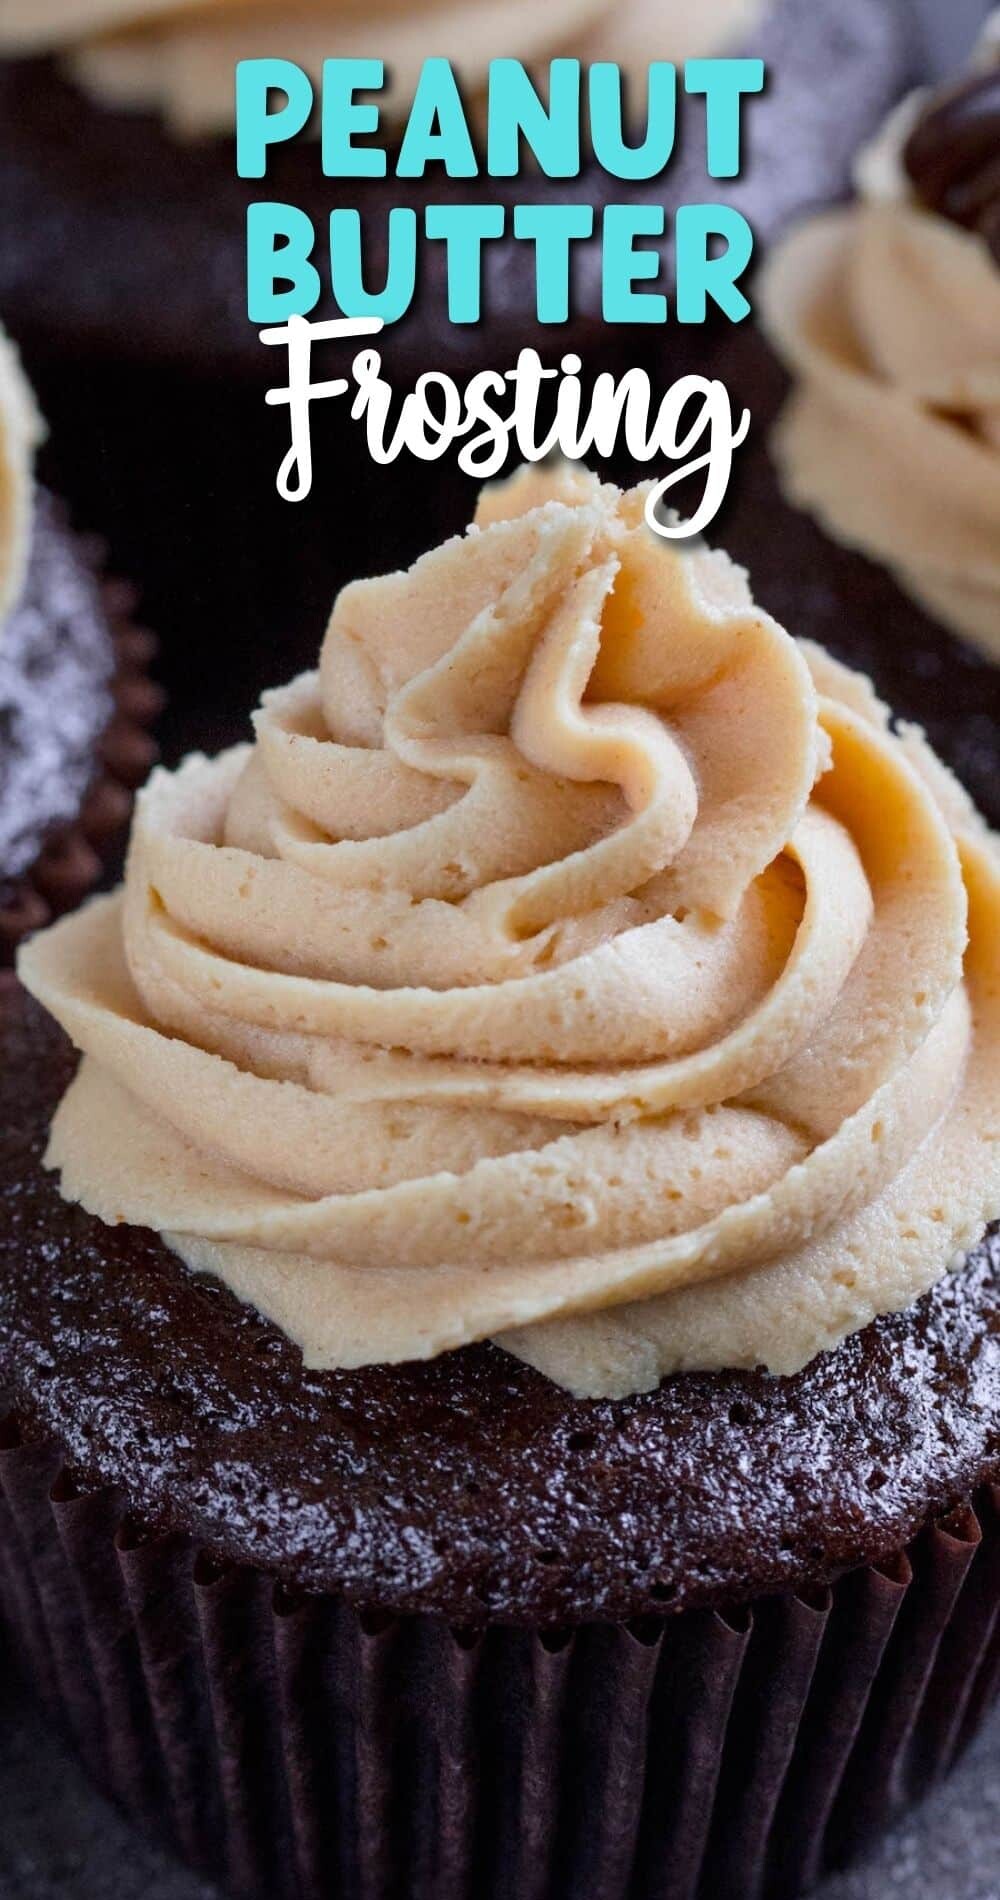 chocolate cake with peanut butter frosting swirled on top with words on the image